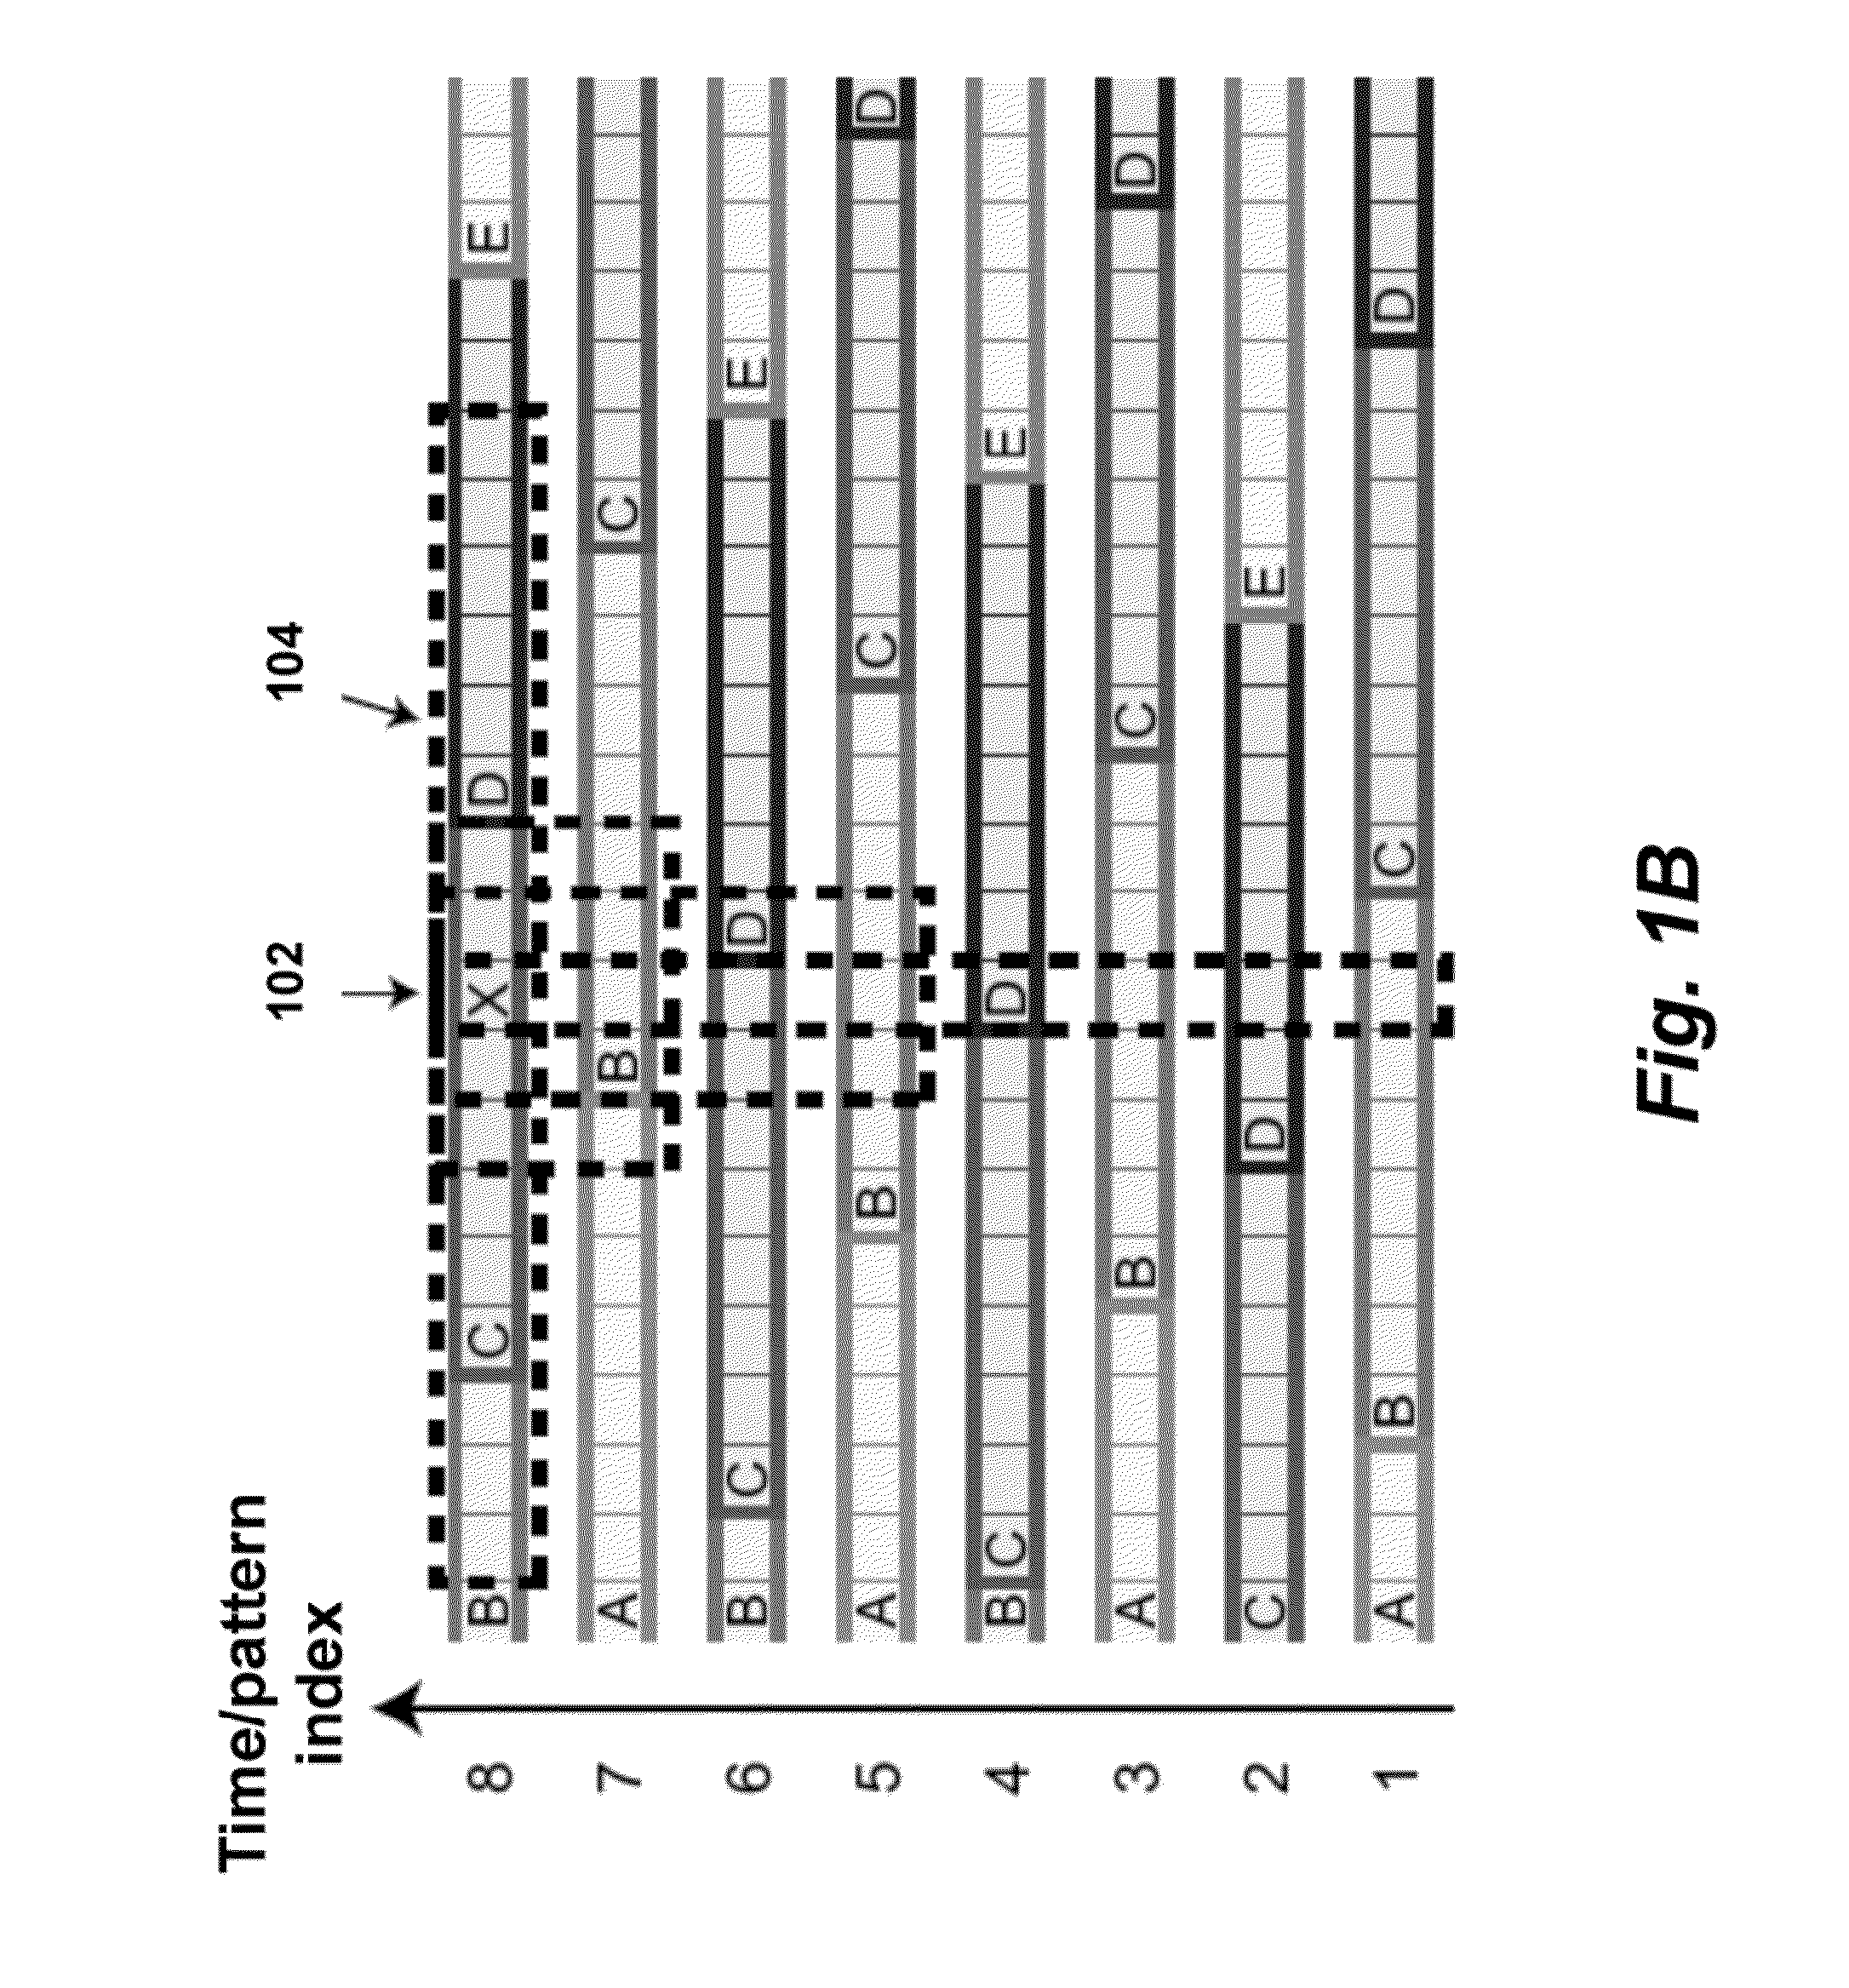 Method and system for generating structured light with spatio-temporal patterns for 3D scene reconstruction